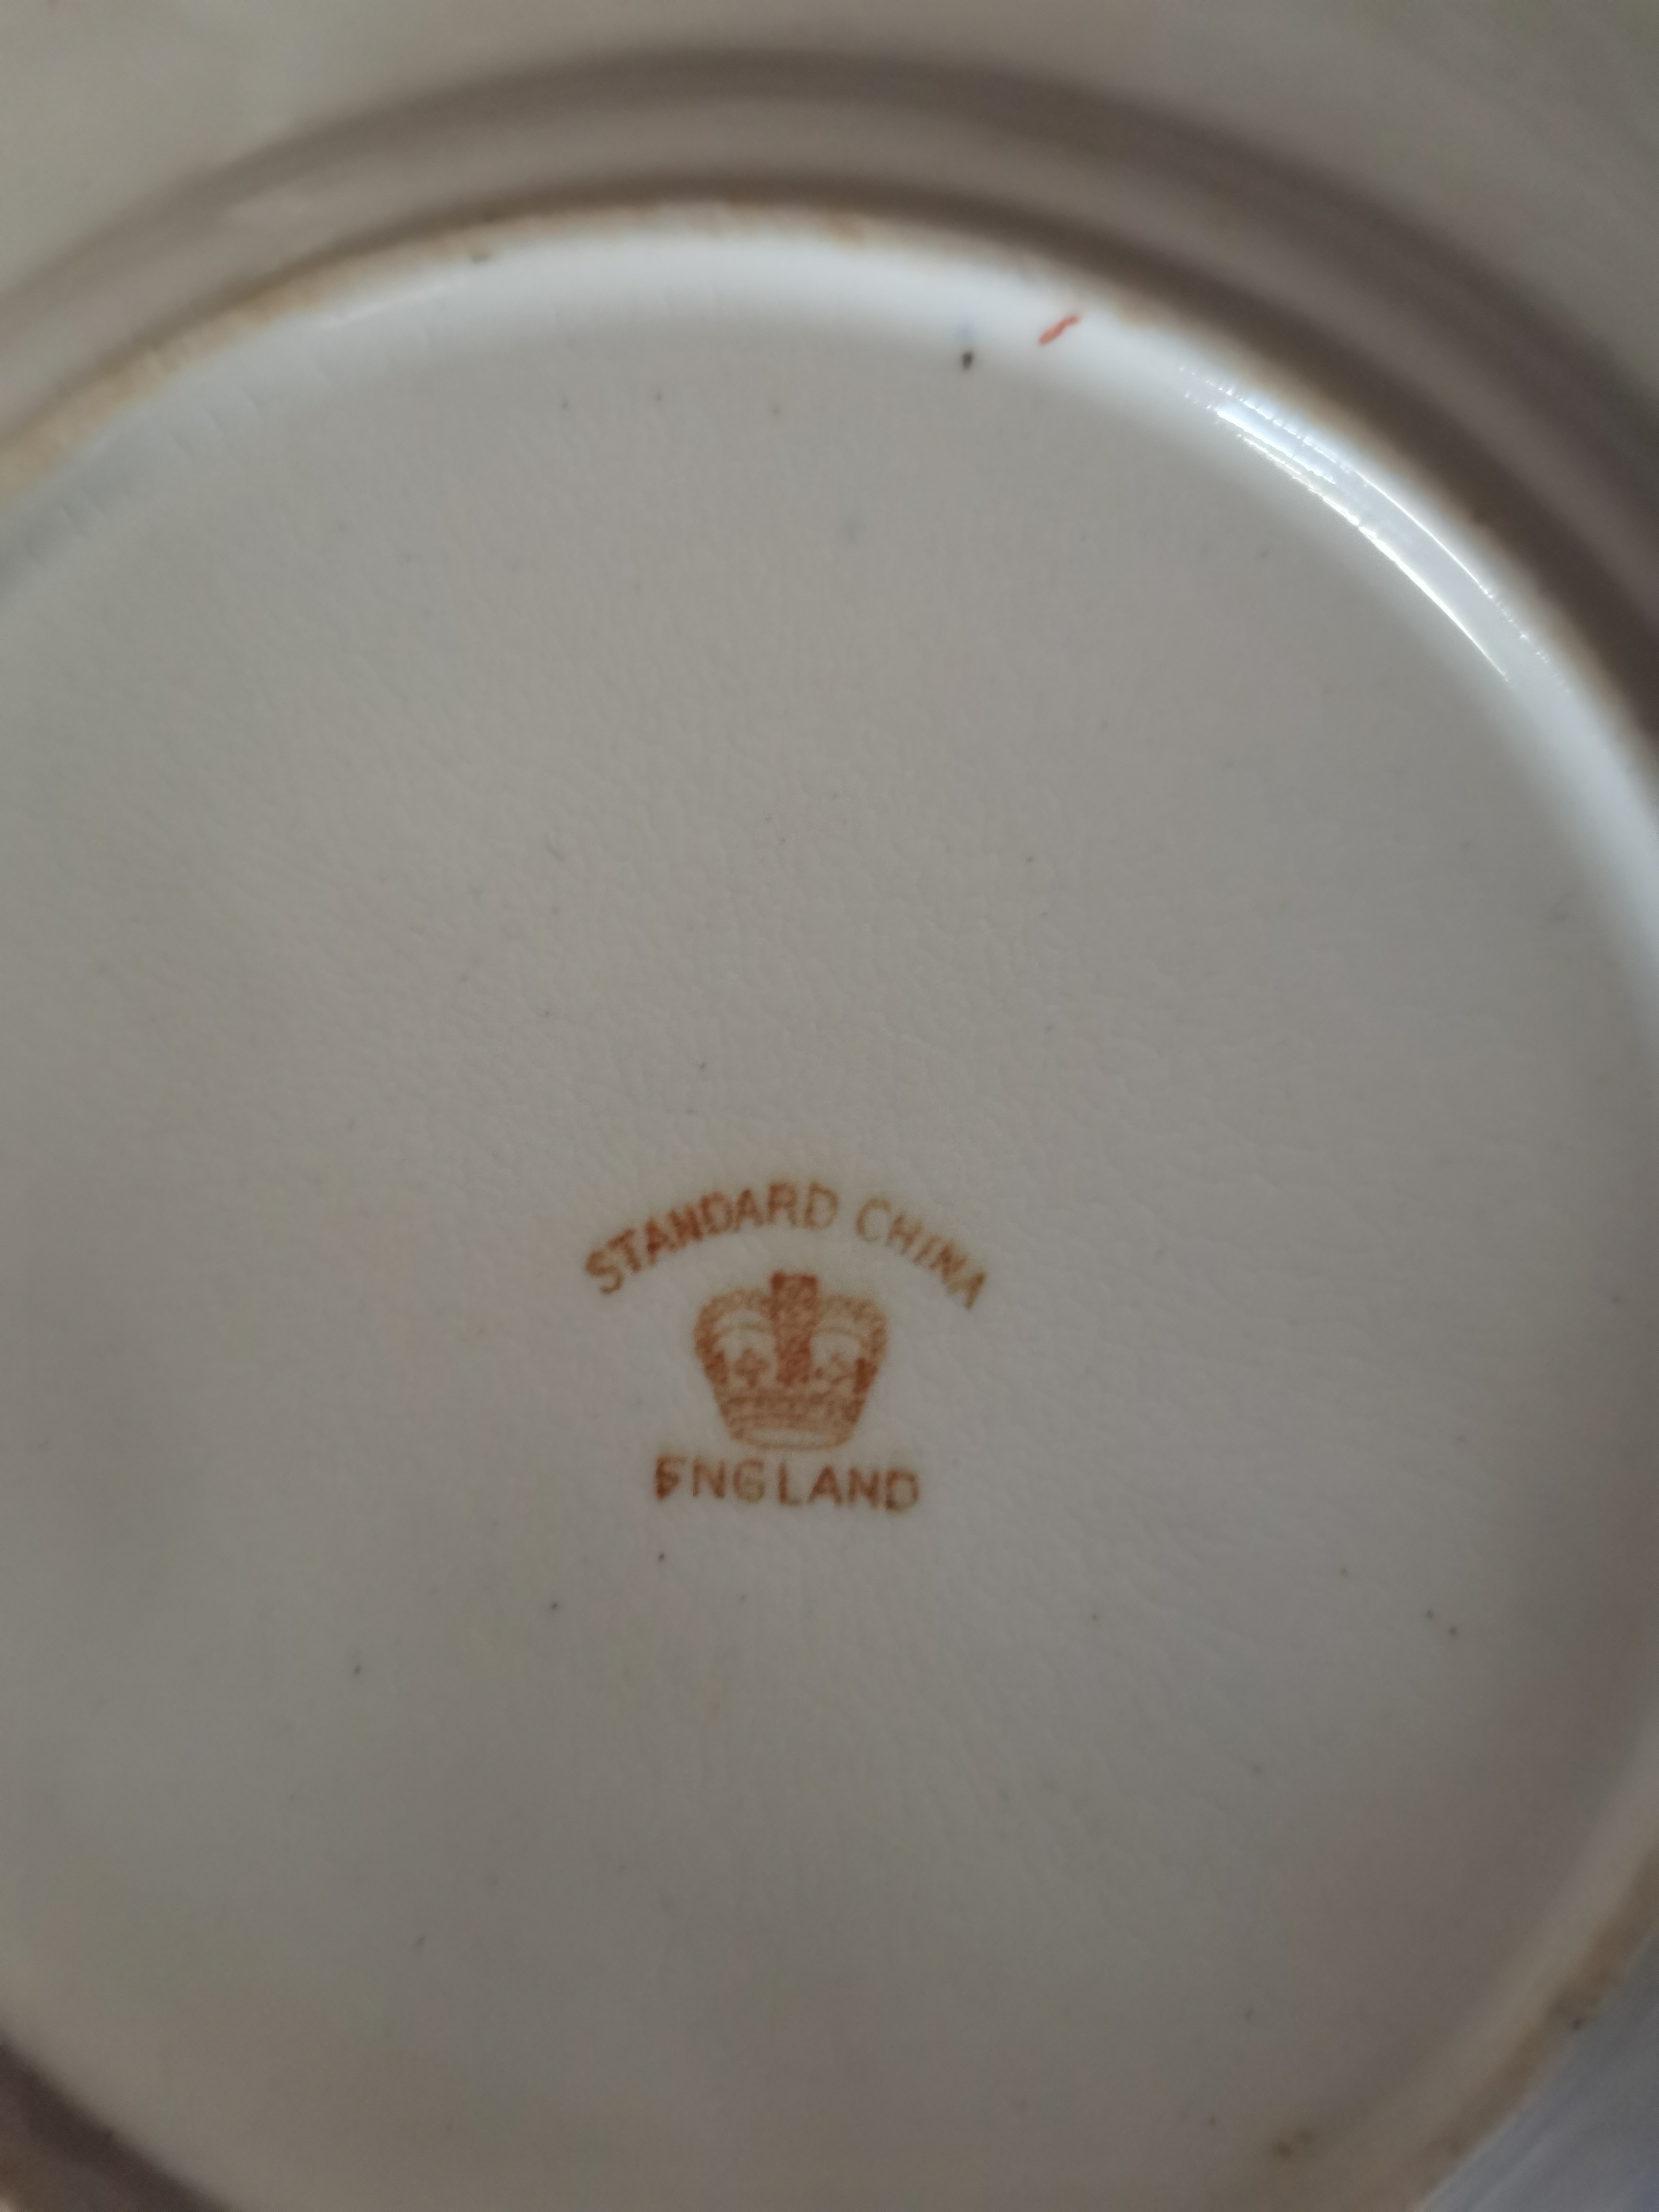 Standard China and Royal Windsor Wood & sons Dinner Service - Image 2 of 3